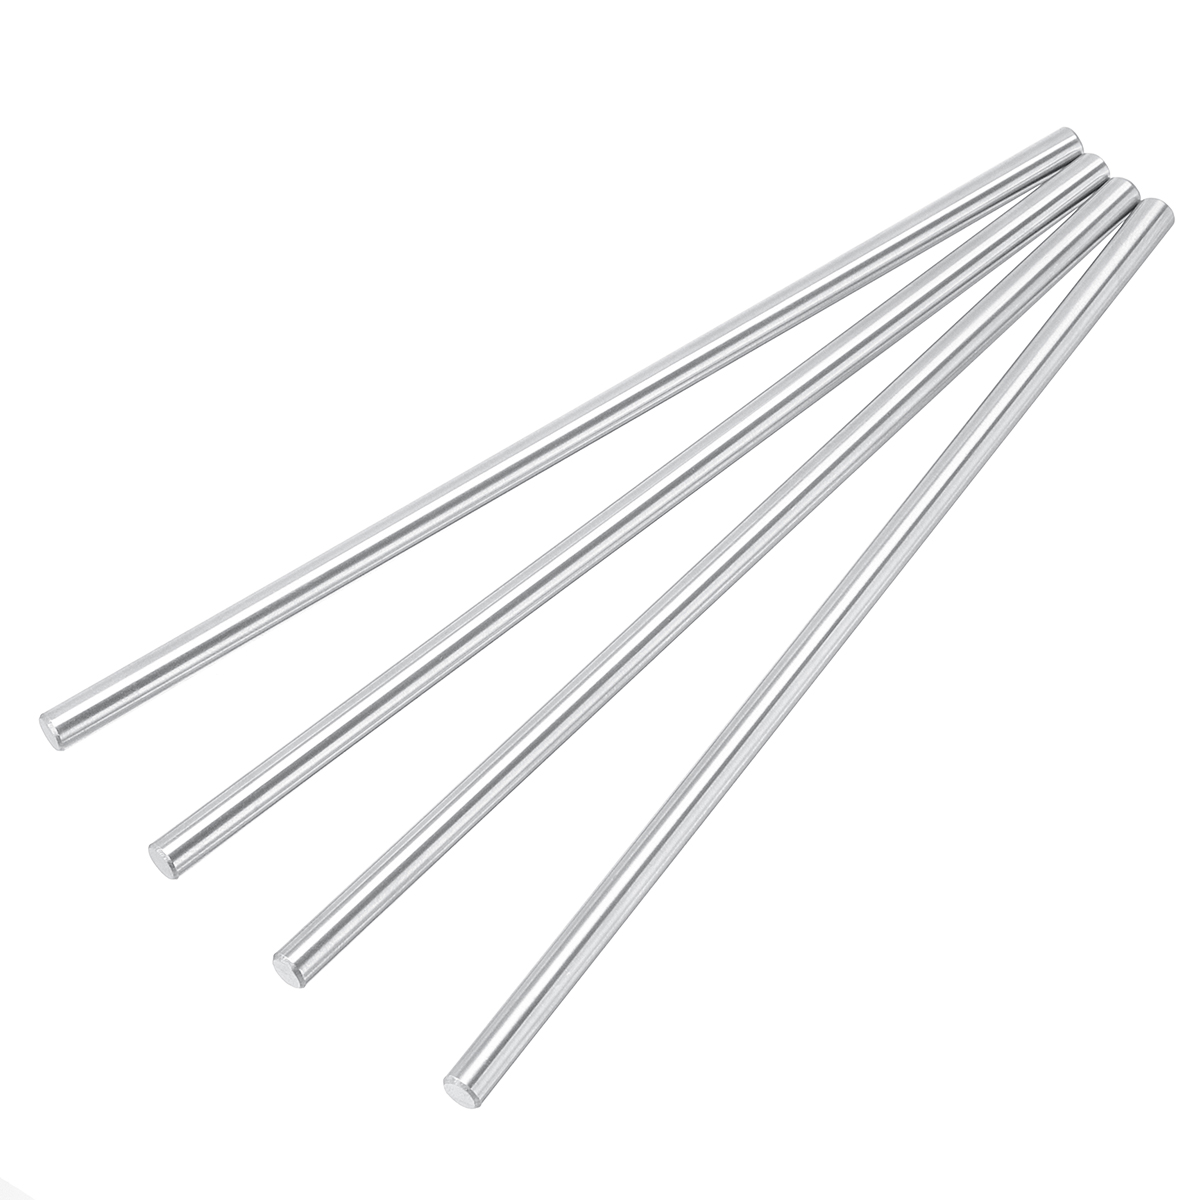 10pcs-52mm-Ejector-Pins-Set-32-152cm-Push-Rifling-Button-Ejector-Pins-for-Machine-Reamer-1311536-7